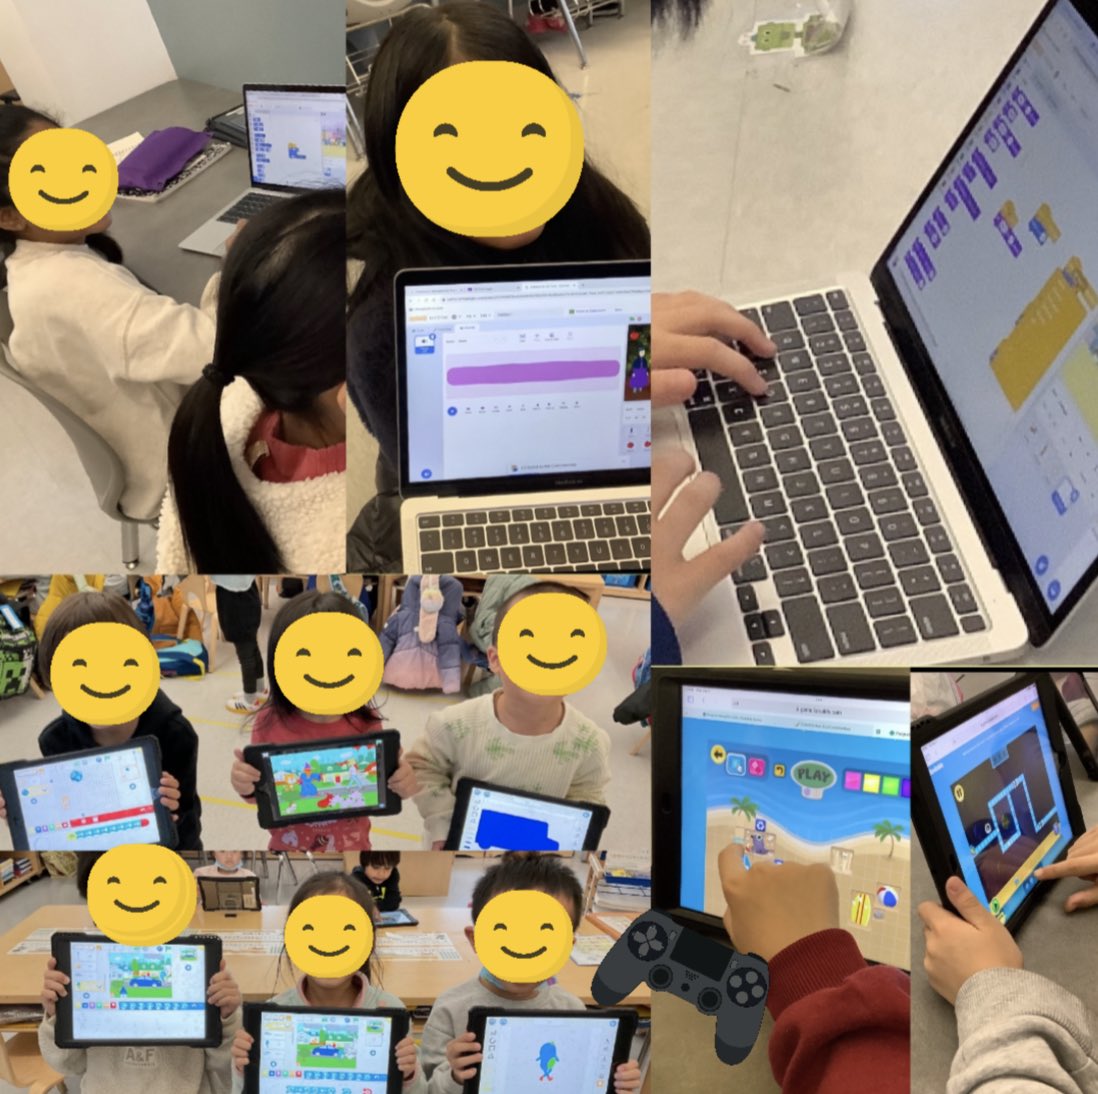 Happy coders so far this week at PS24Q celebrating #HourOfCode but can’t wait till tomorrow with our 3-5 #Minecraftedu AI event! @scratch @ScratchJr @CSforAllNYC @kodable #NYCSchoolsTech @codeorg